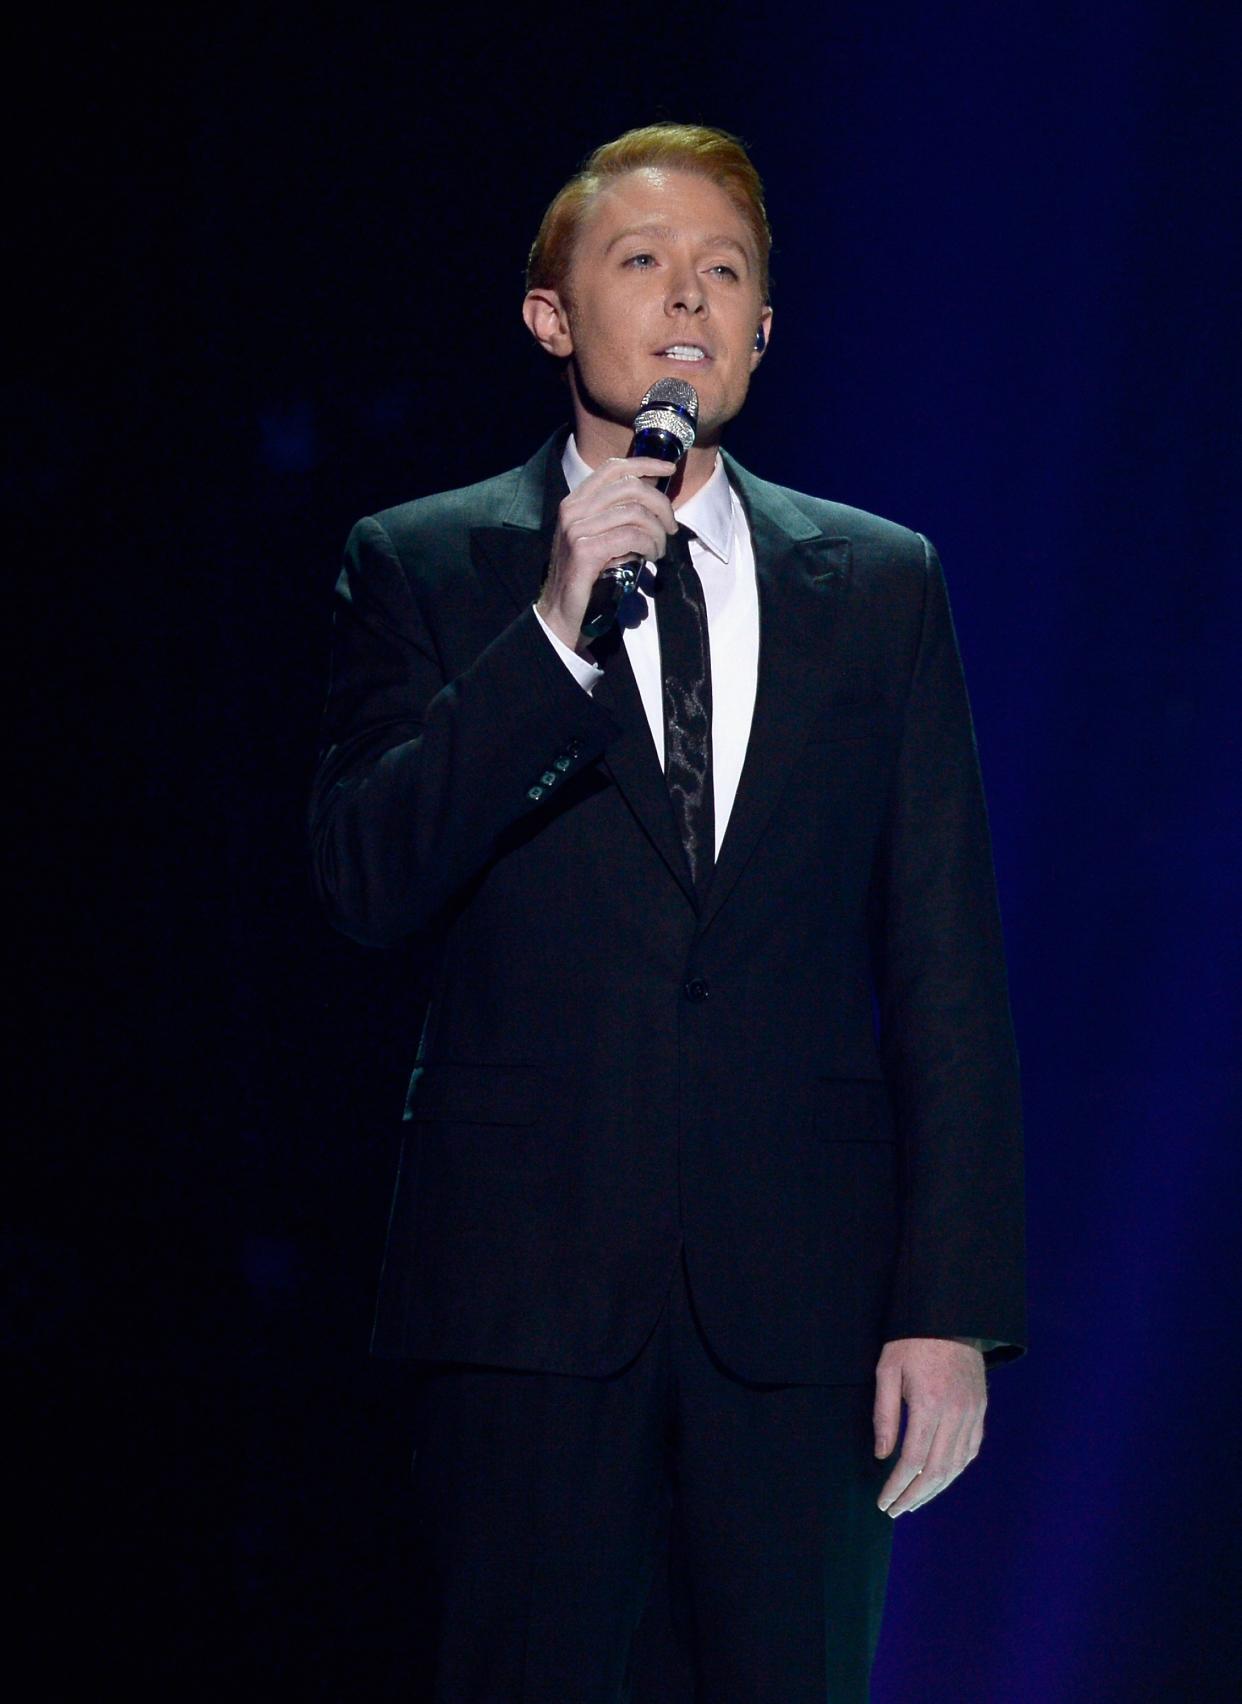 Singer Clay Aiken performs during Fox’s “American Idol” finale for the farewell season at Dolby Theatre on April 7, 2016, in Hollywood, Calif. (Photo by Kevork Djansezian/Getty Images)